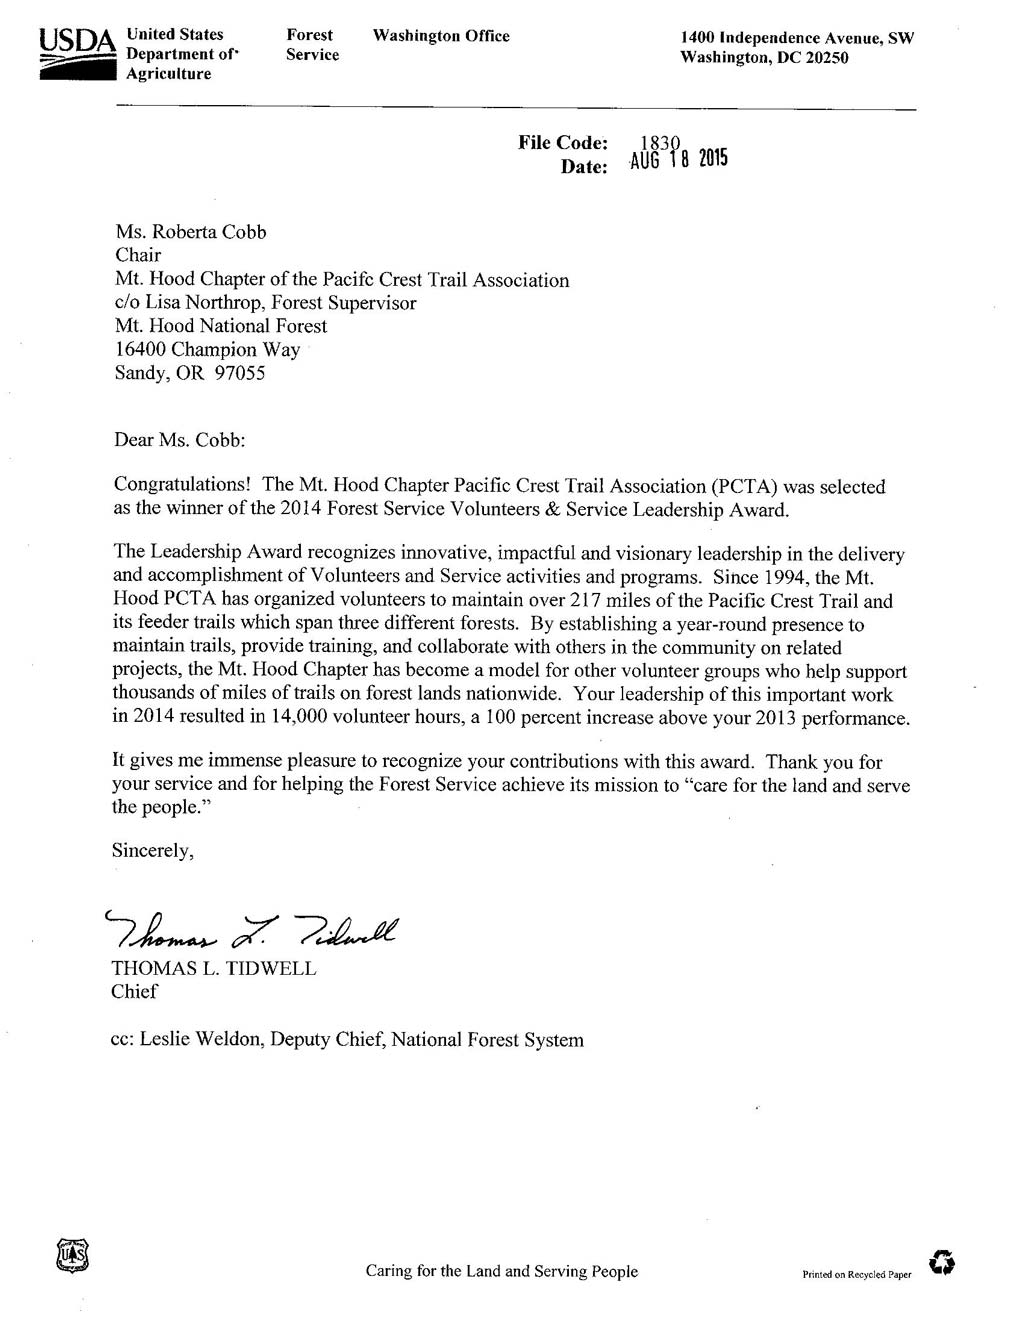 Read the U.S. Forest Service Volunteers & Service Leadership Award letter from Thomas Tidwell, chief of the Forest Service.